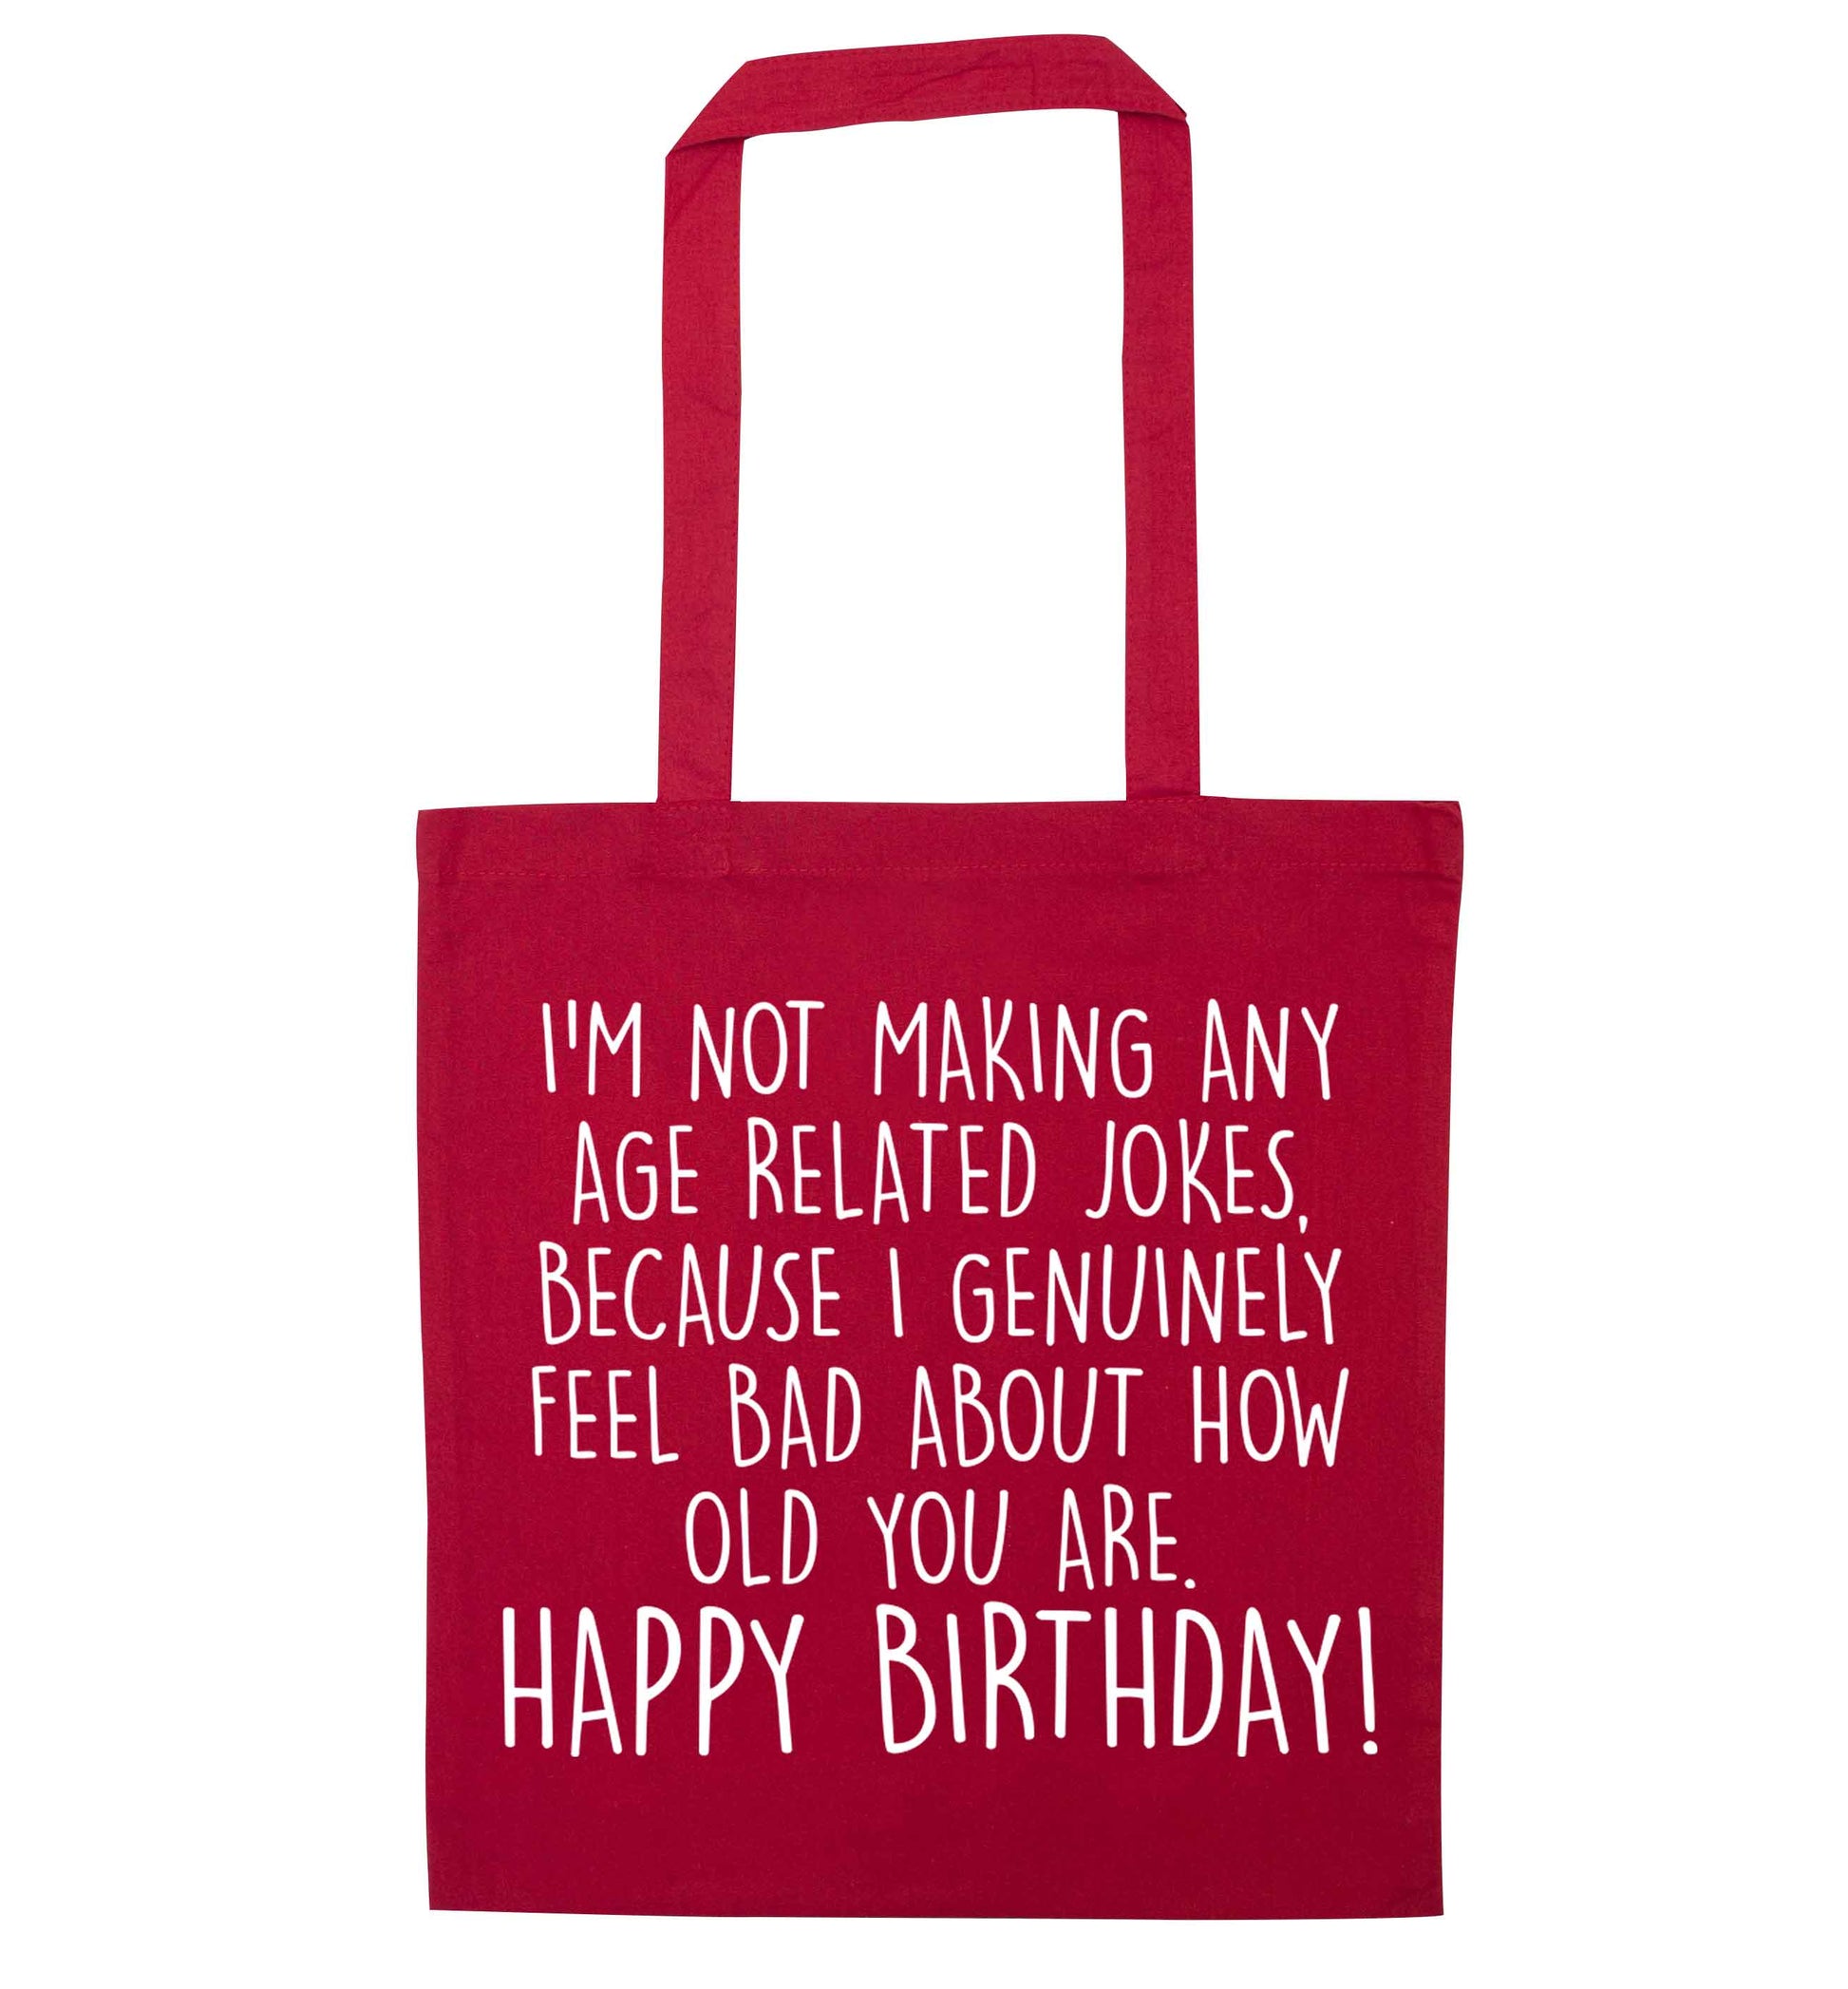 I'm not making any age related jokes because I genuinely feel bad for how old you are red tote bag